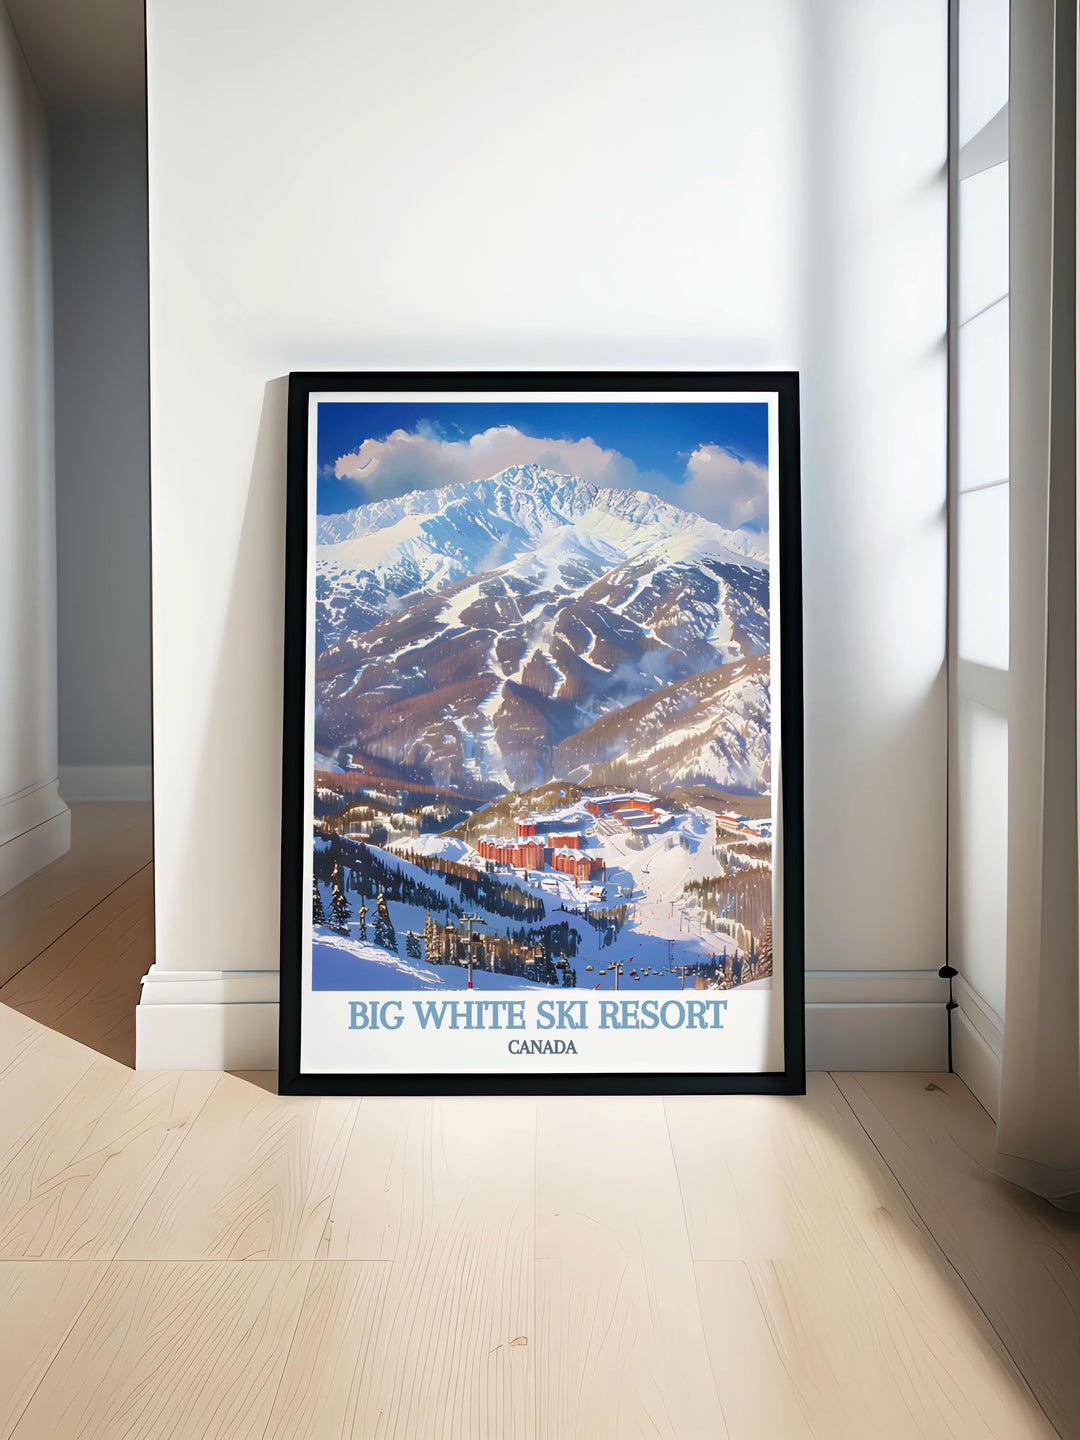 Big White Ski Resort fine art print capturing the stunning snowy peaks and vibrant alpine village, perfect for bringing the beauty and thrill of Canadian winters into your home decor.